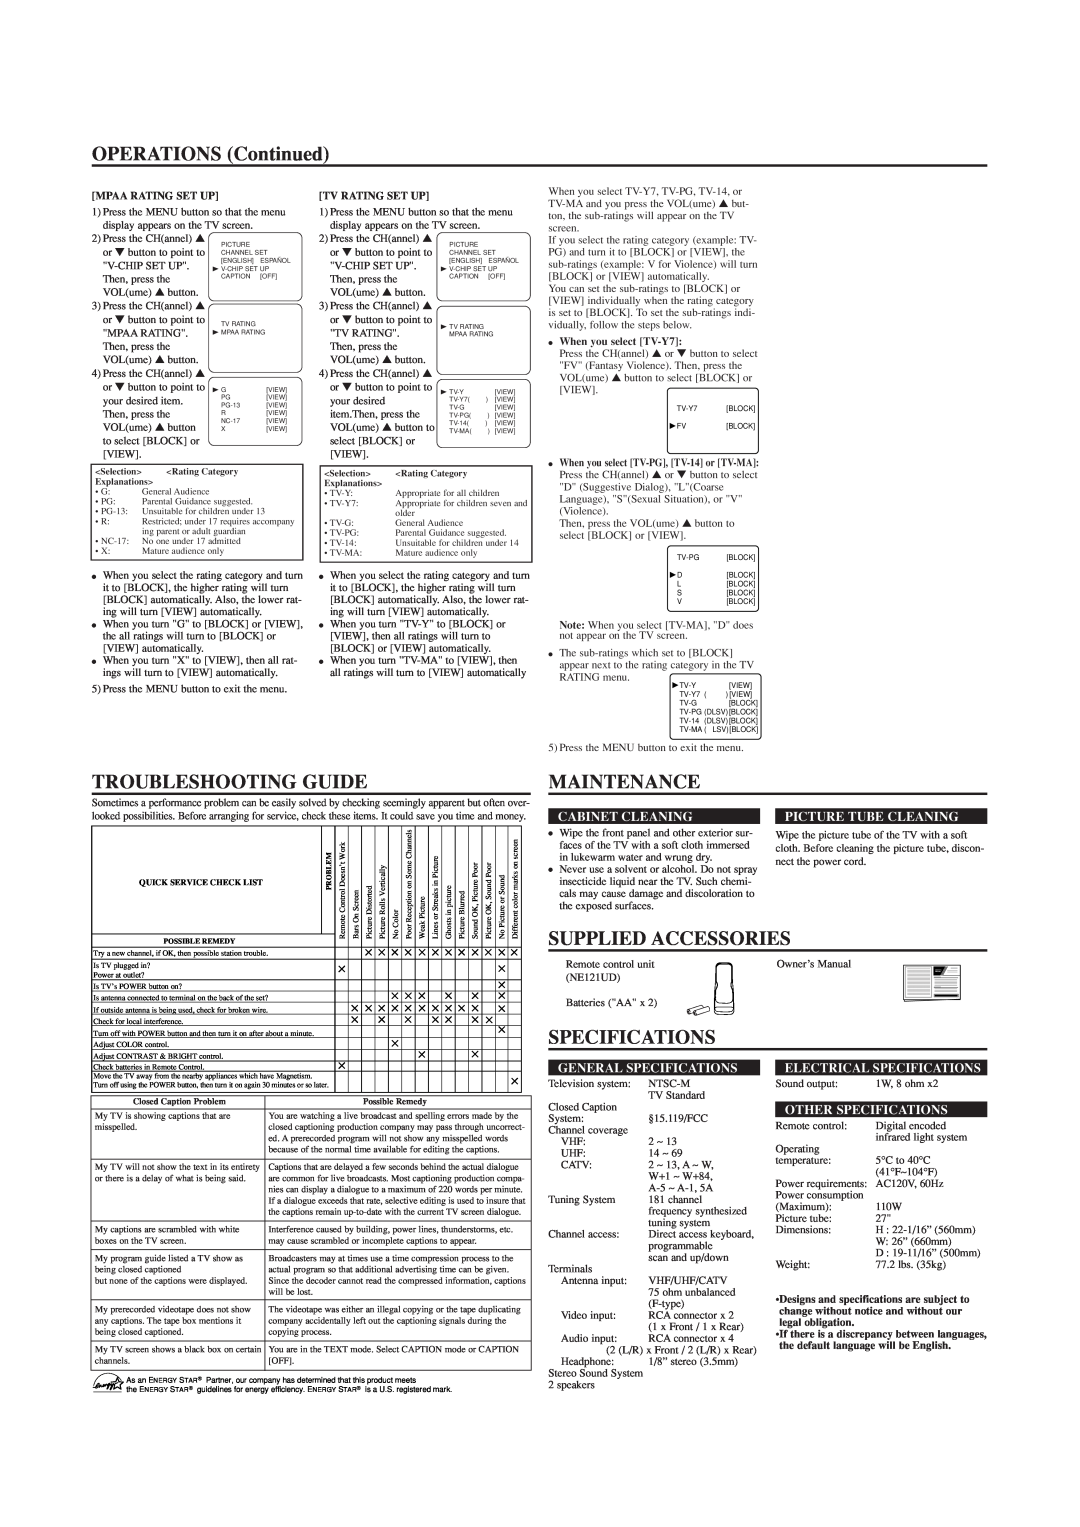 Sylvania SST4273 OPERATIONS Continued, Troubleshooting Guide, Maintenance, Supplied Accessories, Specifications 